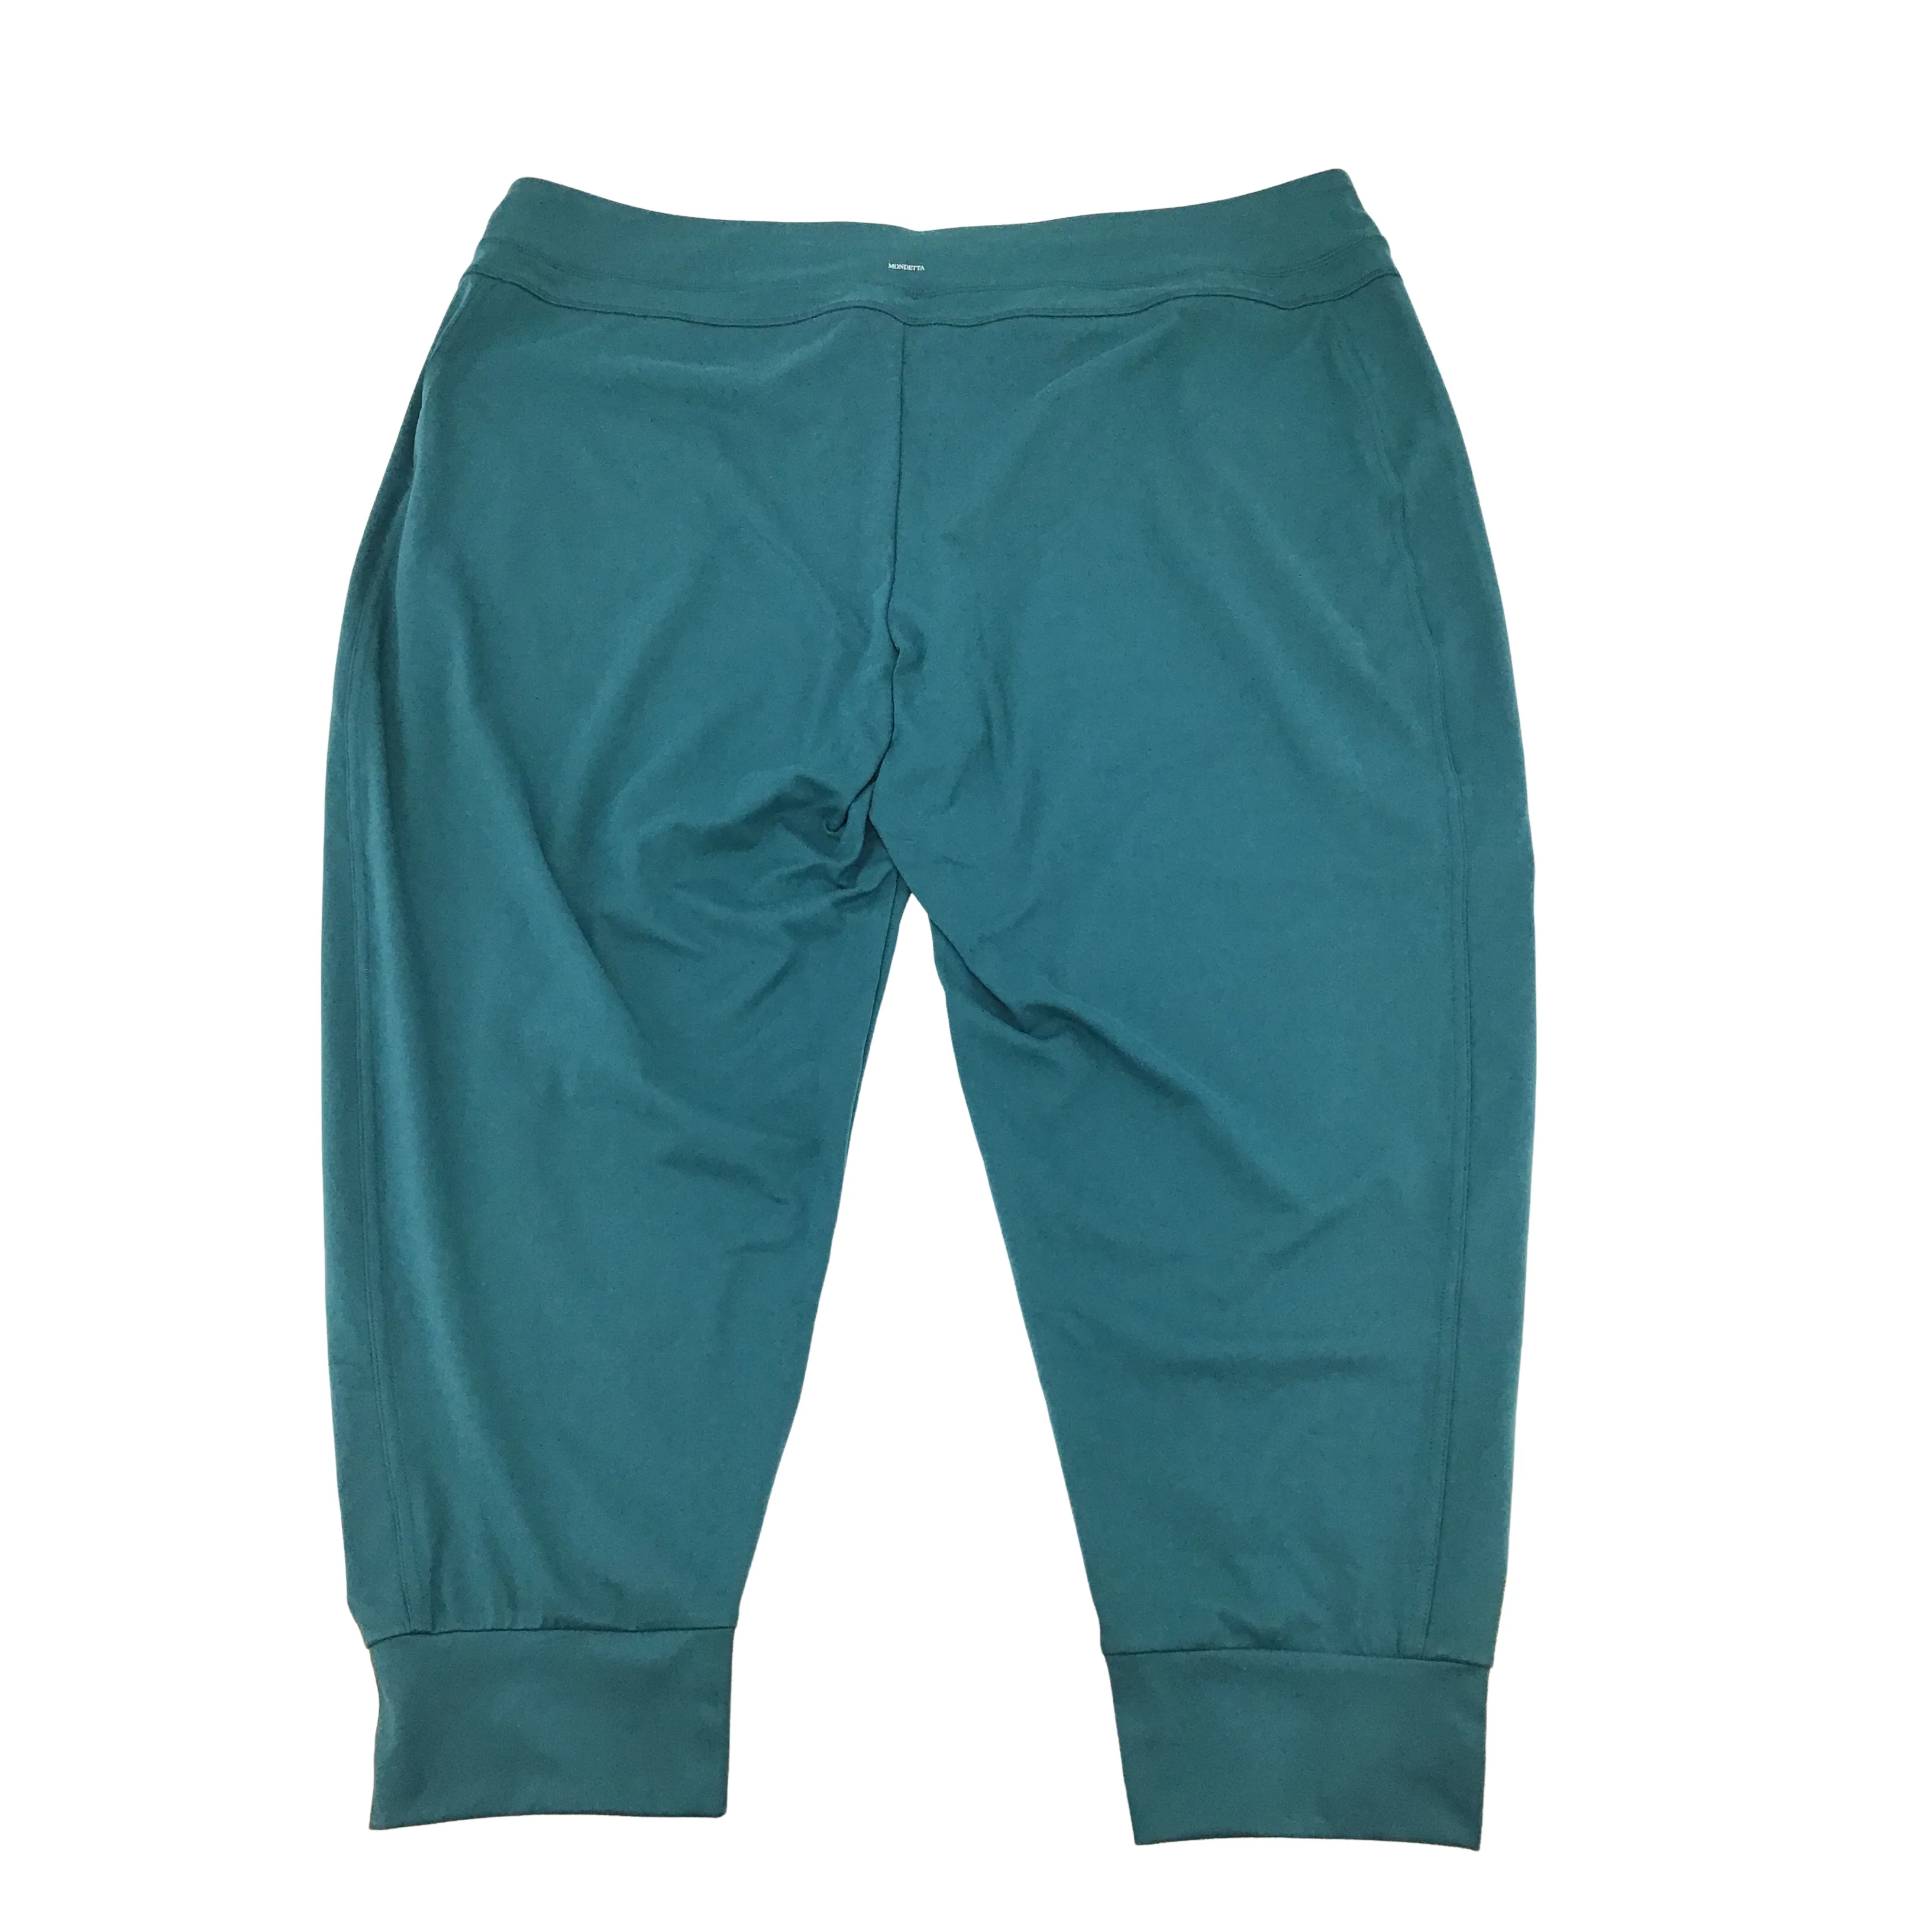 Mondetta: Women's Active Jogger / Teal / Cropped / 2X